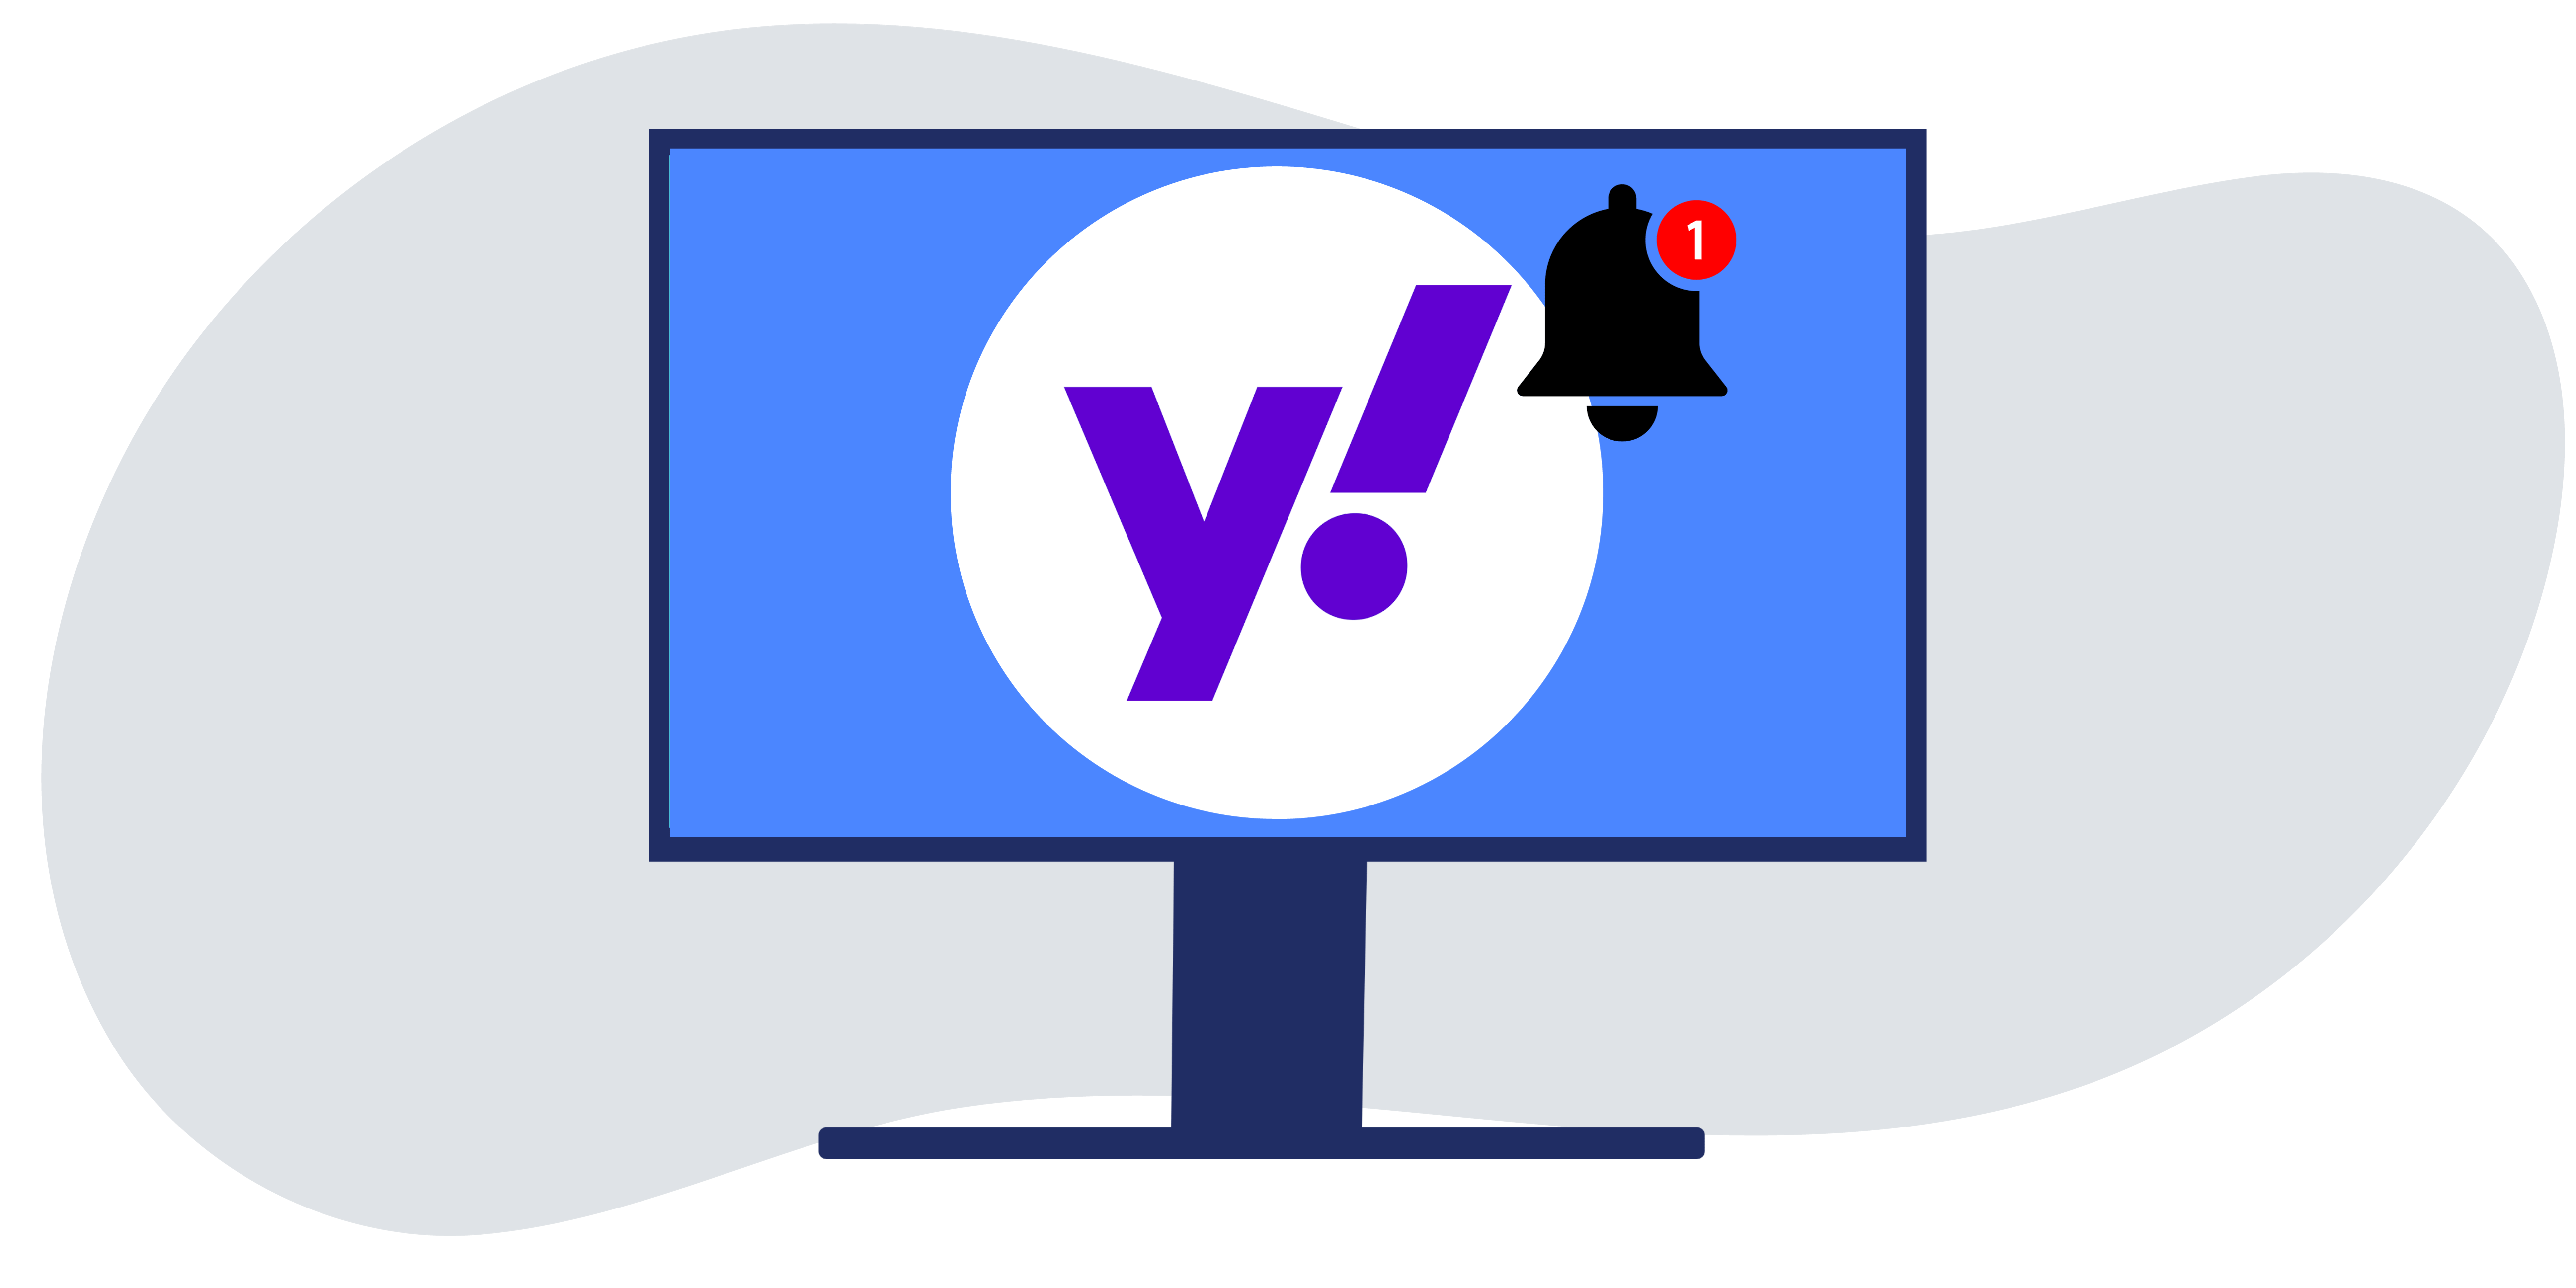 Google And Yahoo New Email Authentication